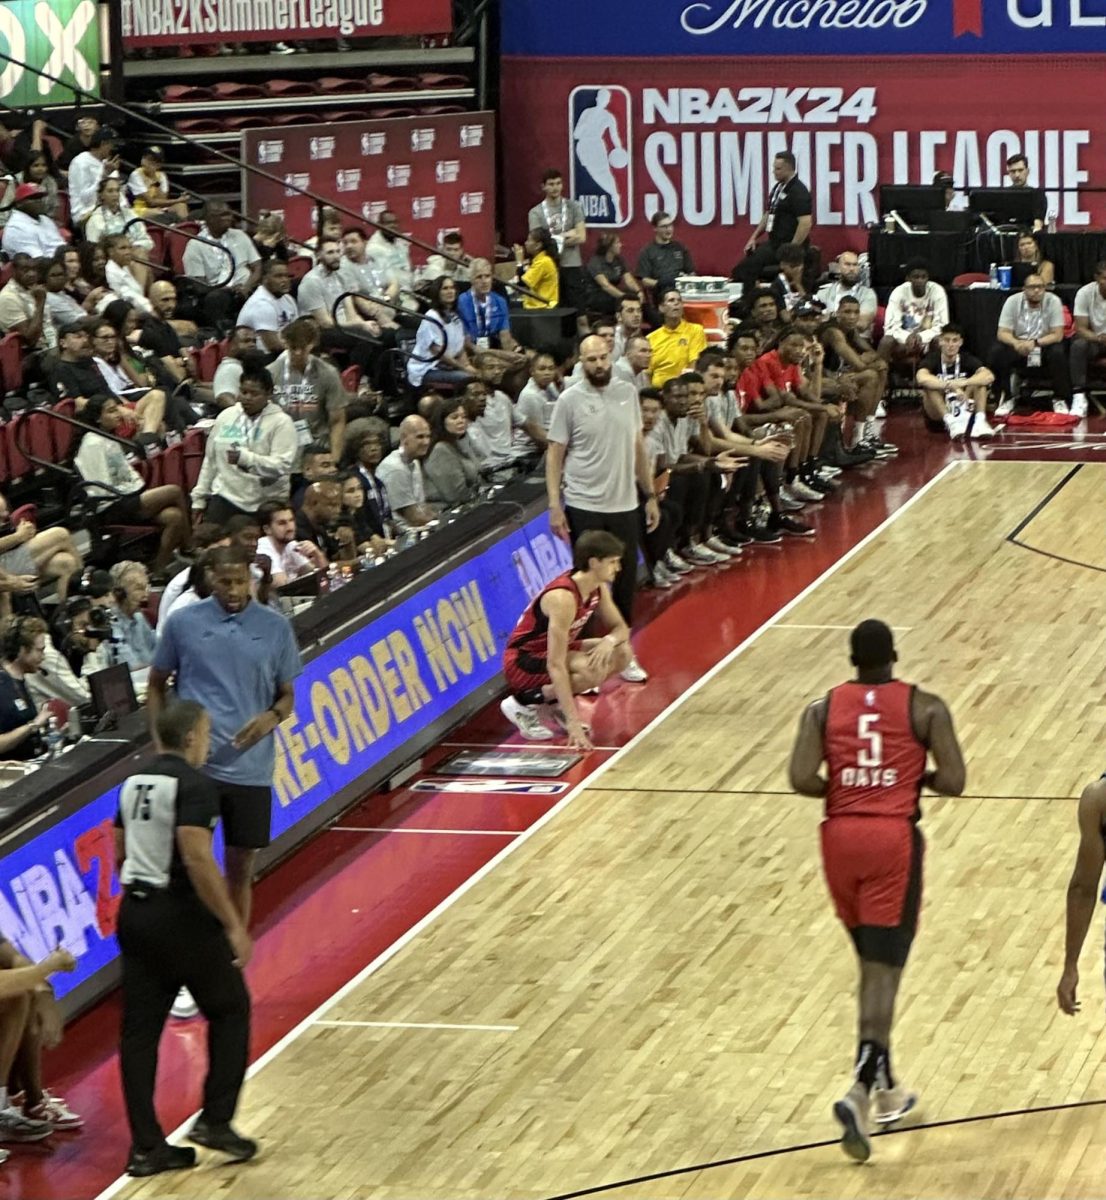 Former Illini Matthew Mayer checking in for his NBA 2K24 Summer League debut against the Oklahoma City Thunder. Since then, Mayer and the Houston Rockets have won two games to clinch a spot in the Summer League semifinals.  